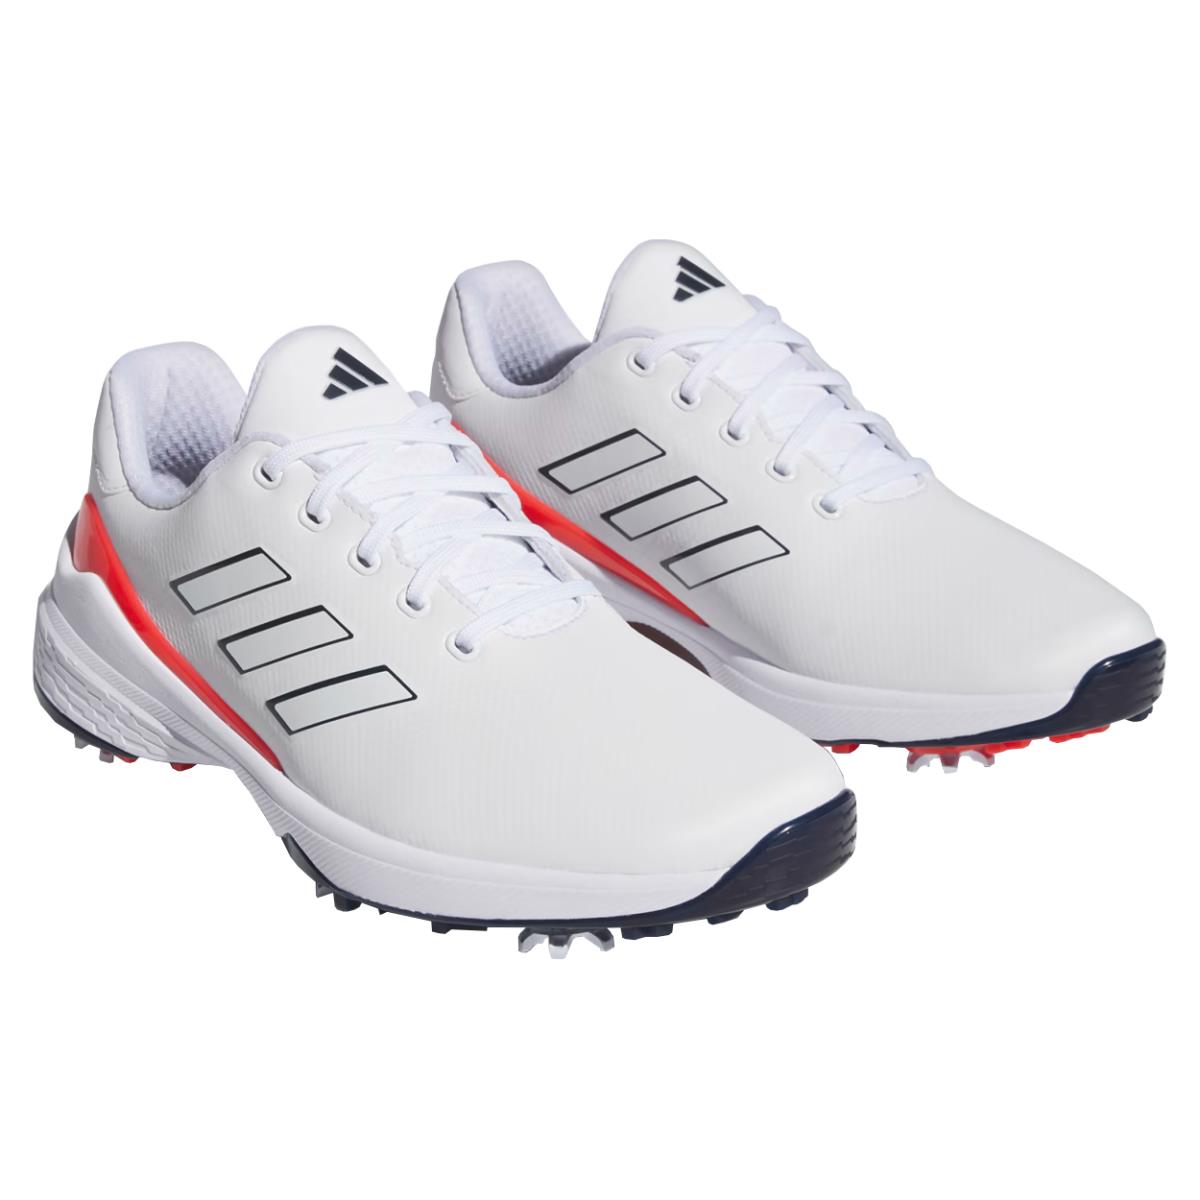 Adidas Men`s ZG23 Waterproof 6-Spike Golf Shoes White/Navy/Red